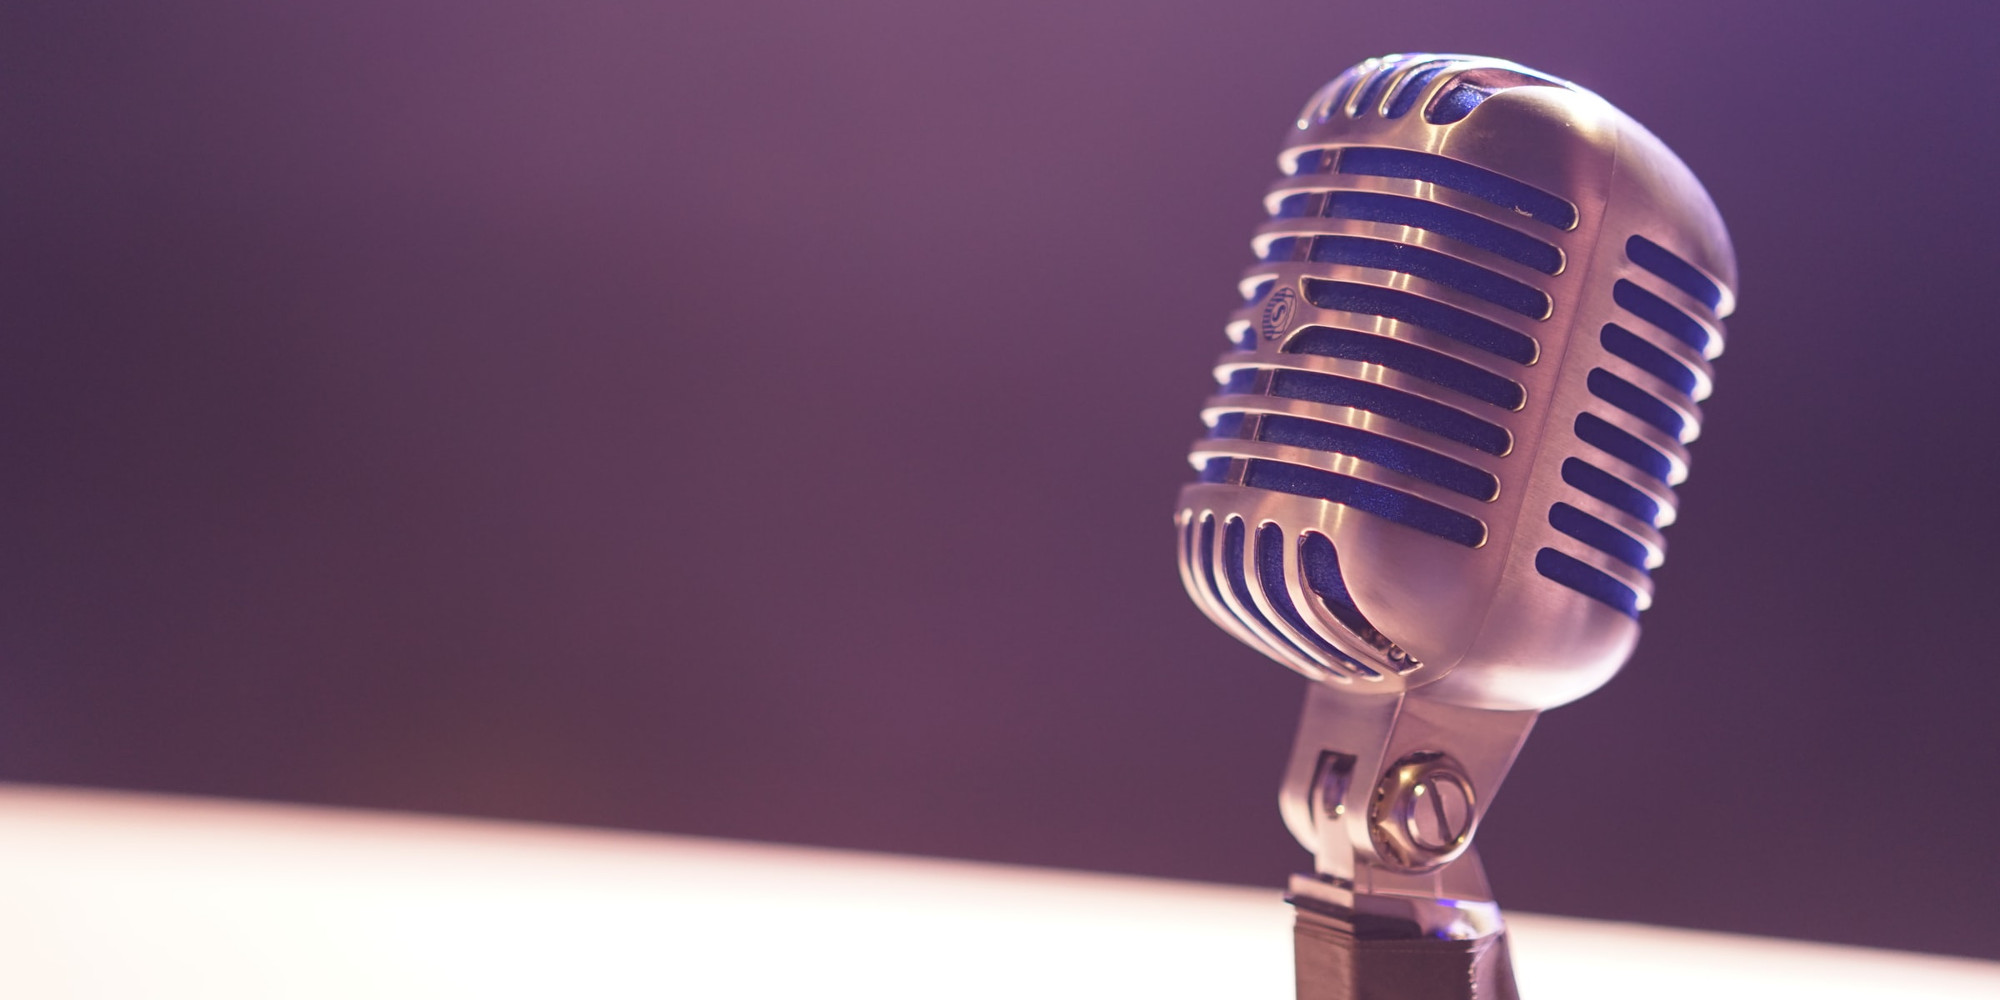 A microphone on a purple background